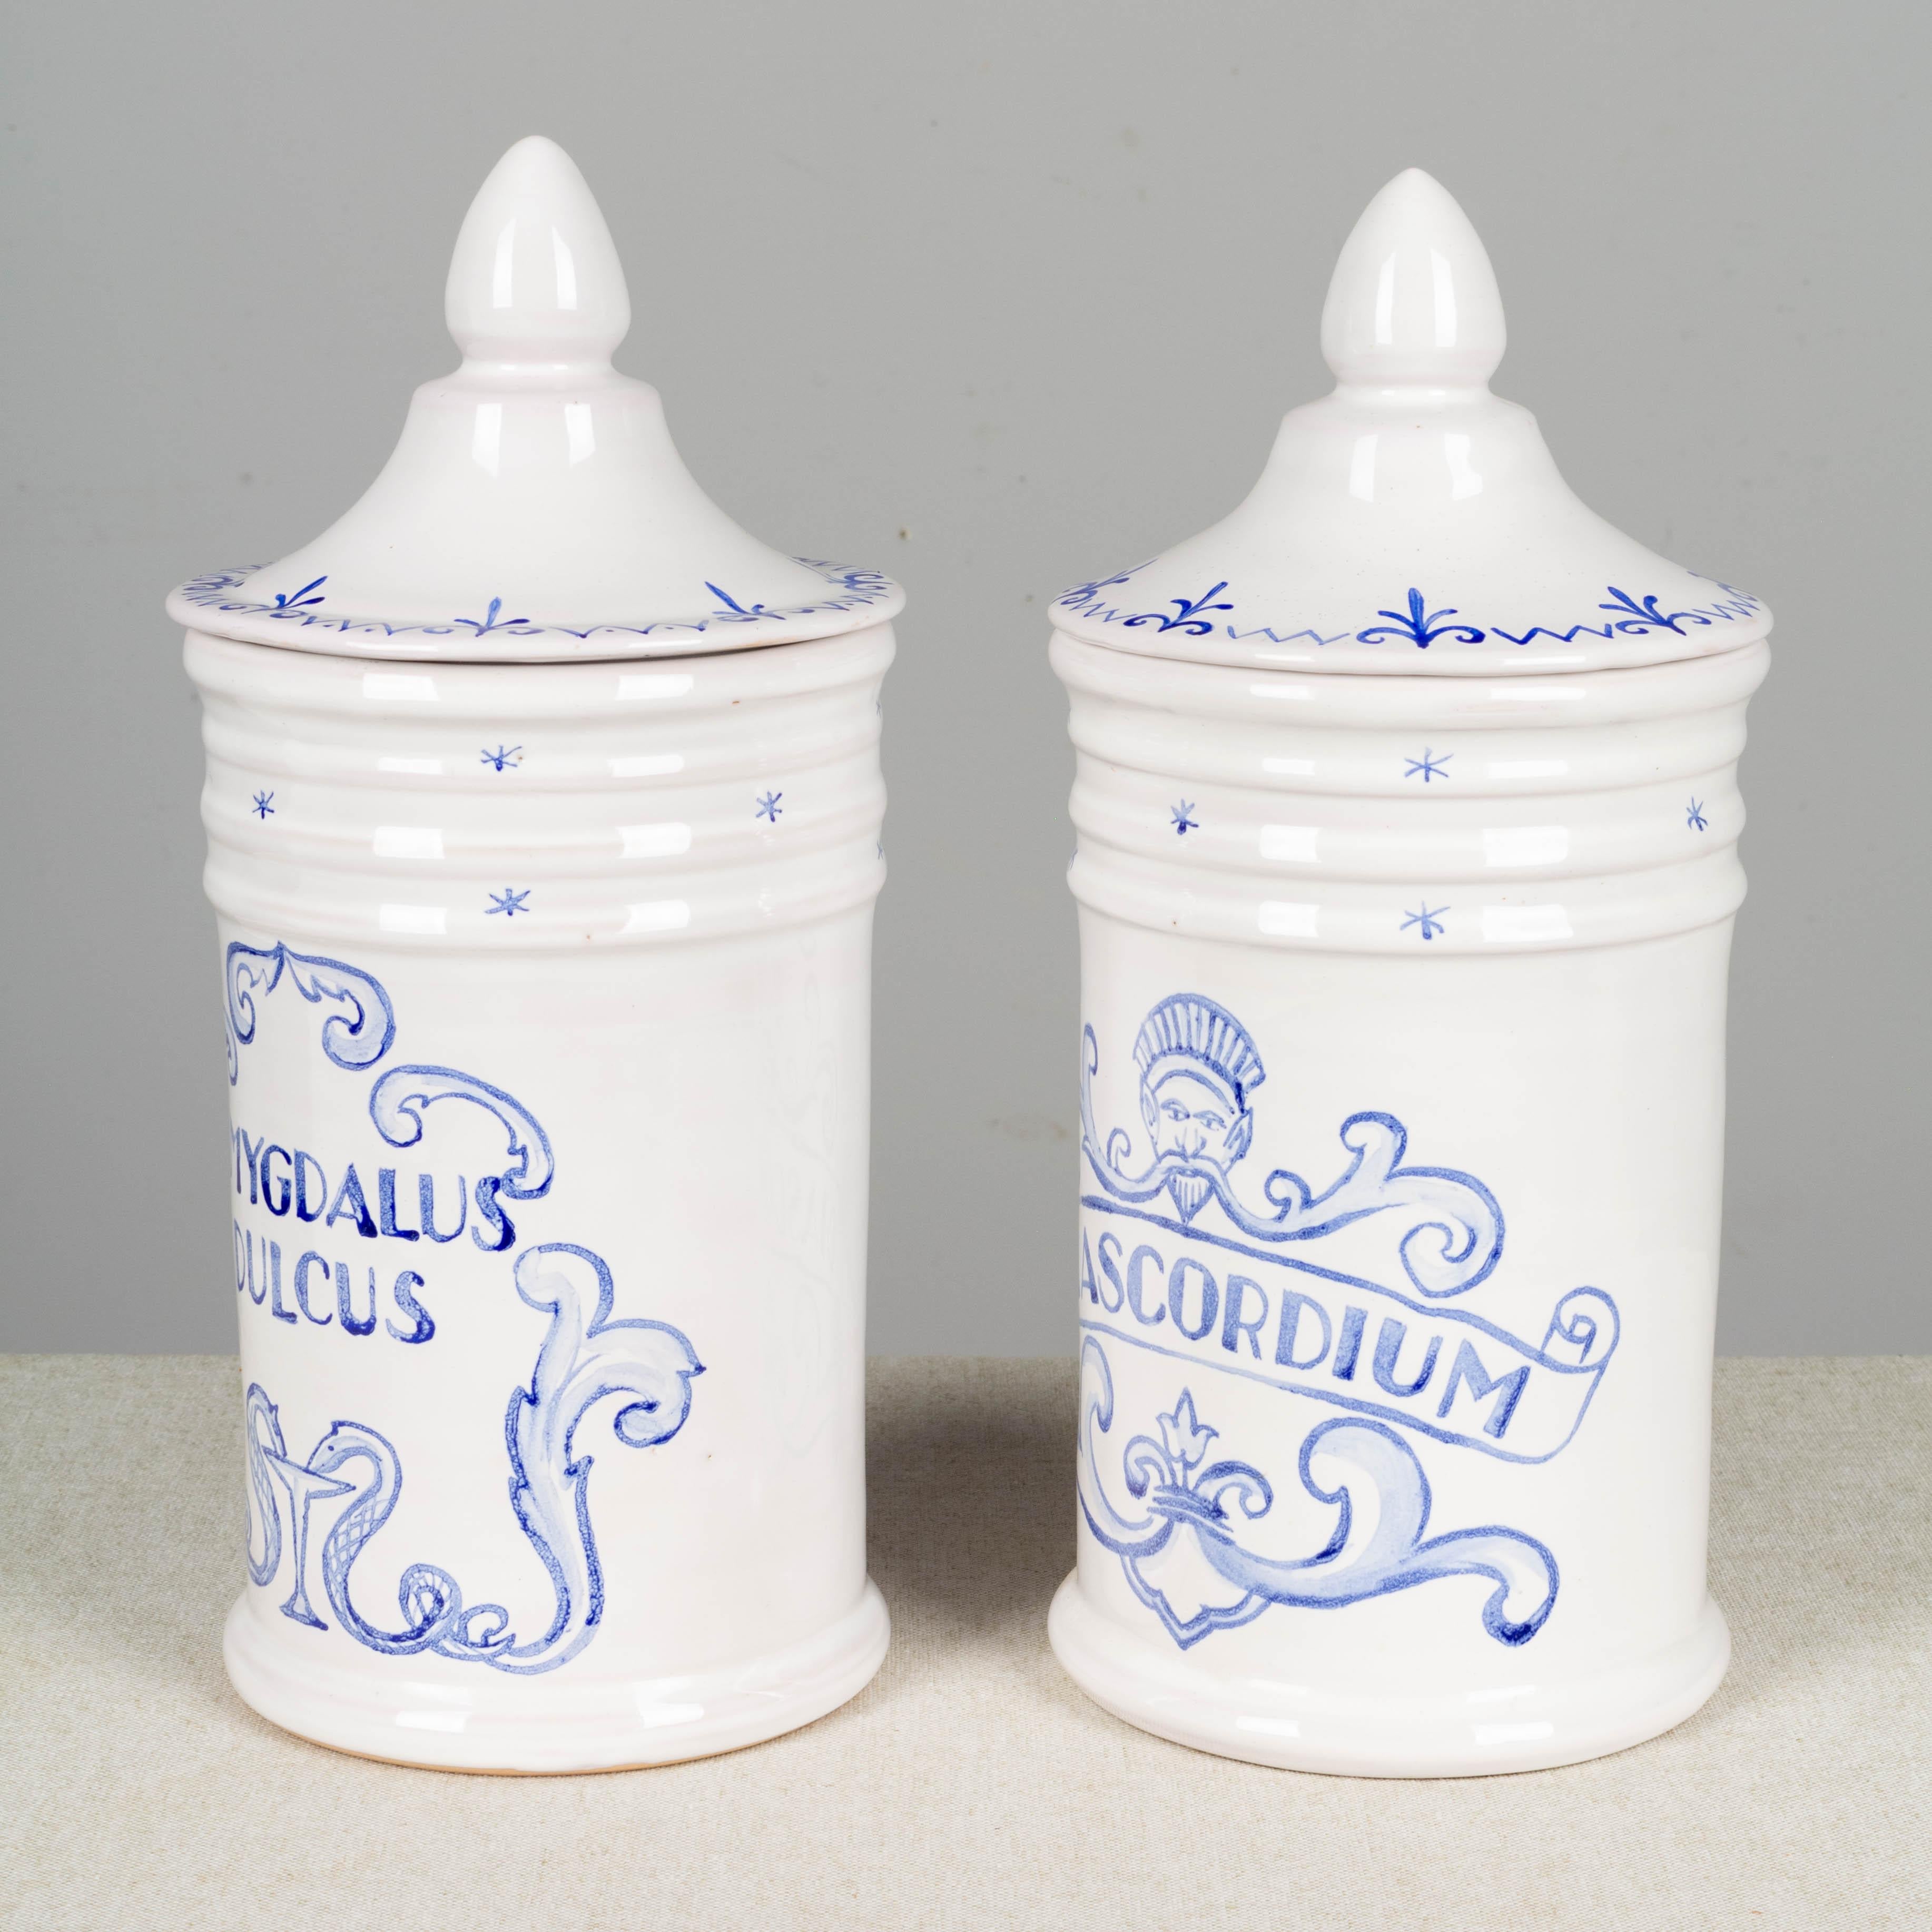 A pair of French Moustiers white glazed ceramic lidded apothecary jars with pale blue hand painted decoration. One is labeled Amygdalus Dulcus and the other labeled Diascordium. Marked on underside: Garnier Moustiers